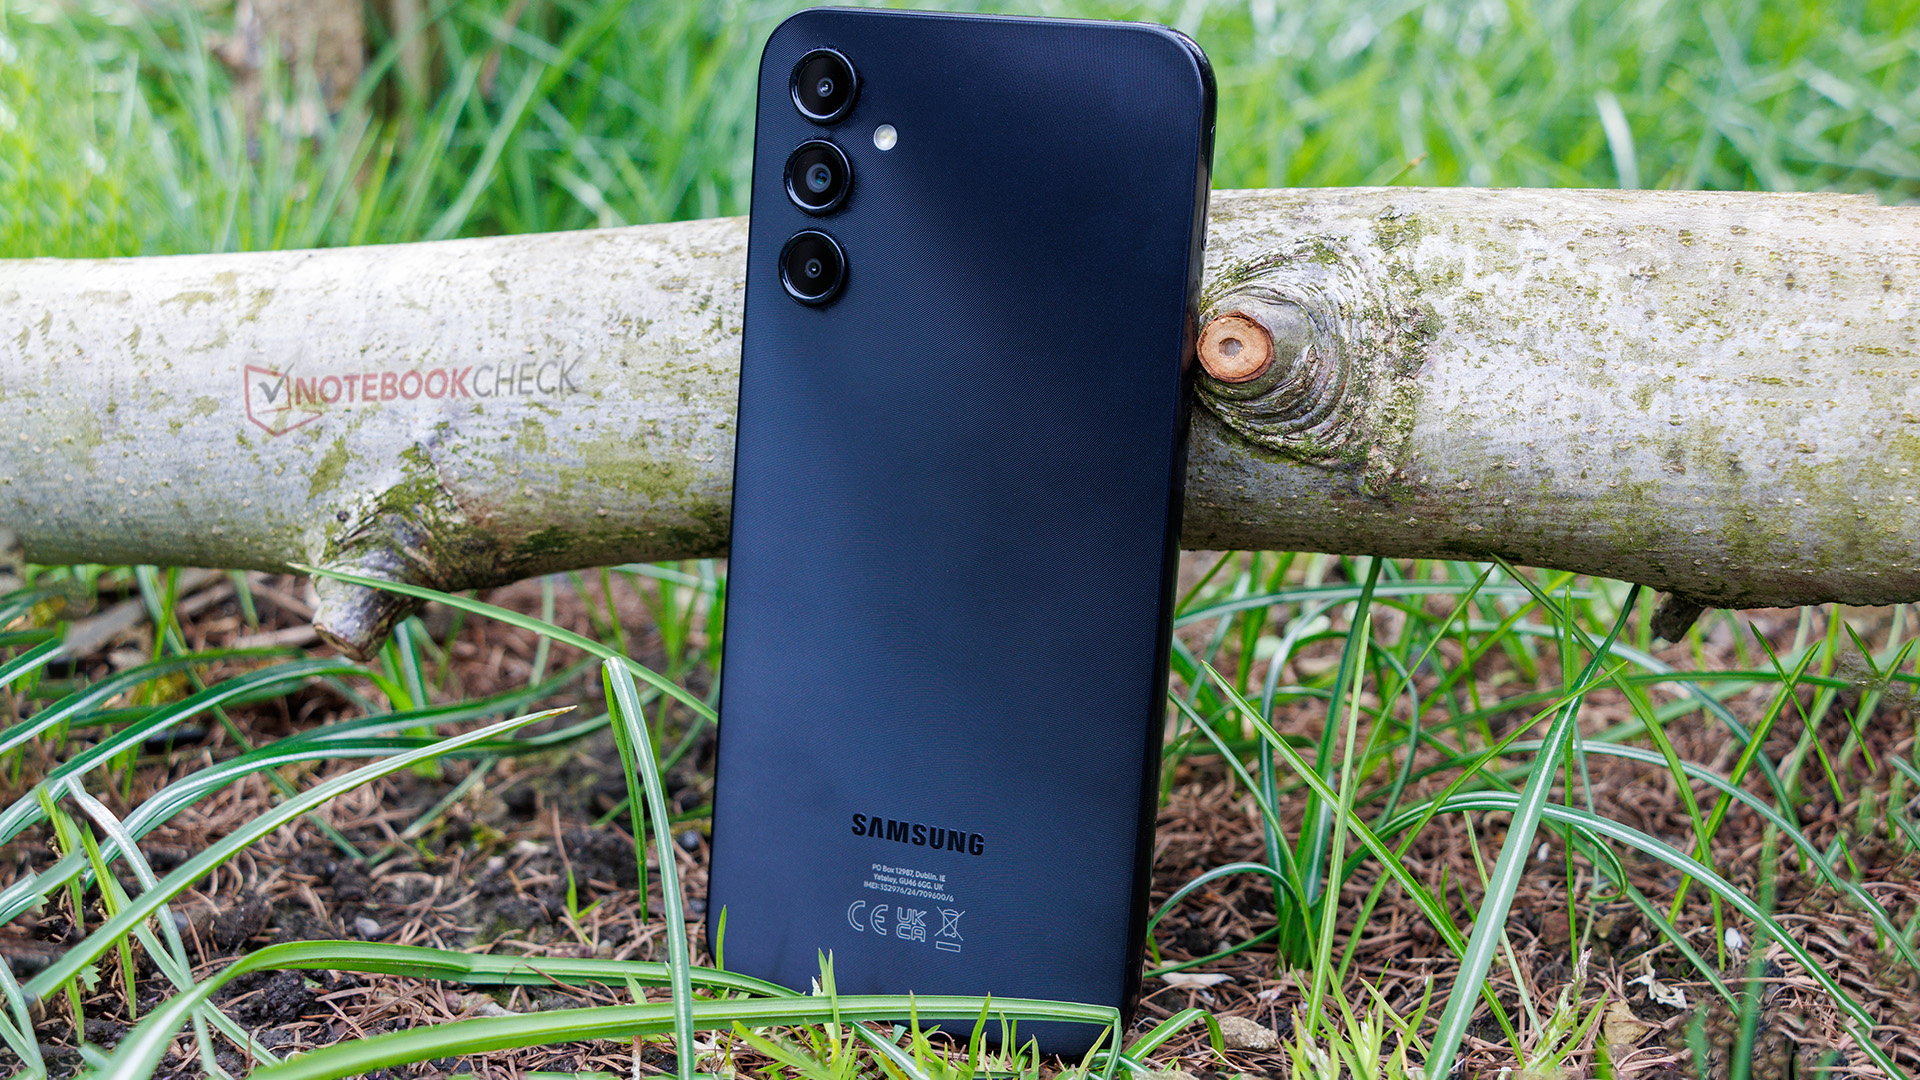  The image shows the back of a black Samsung Galaxy A14 5G smartphone with a 50 MP camera, lying on a wooden log outdoors.